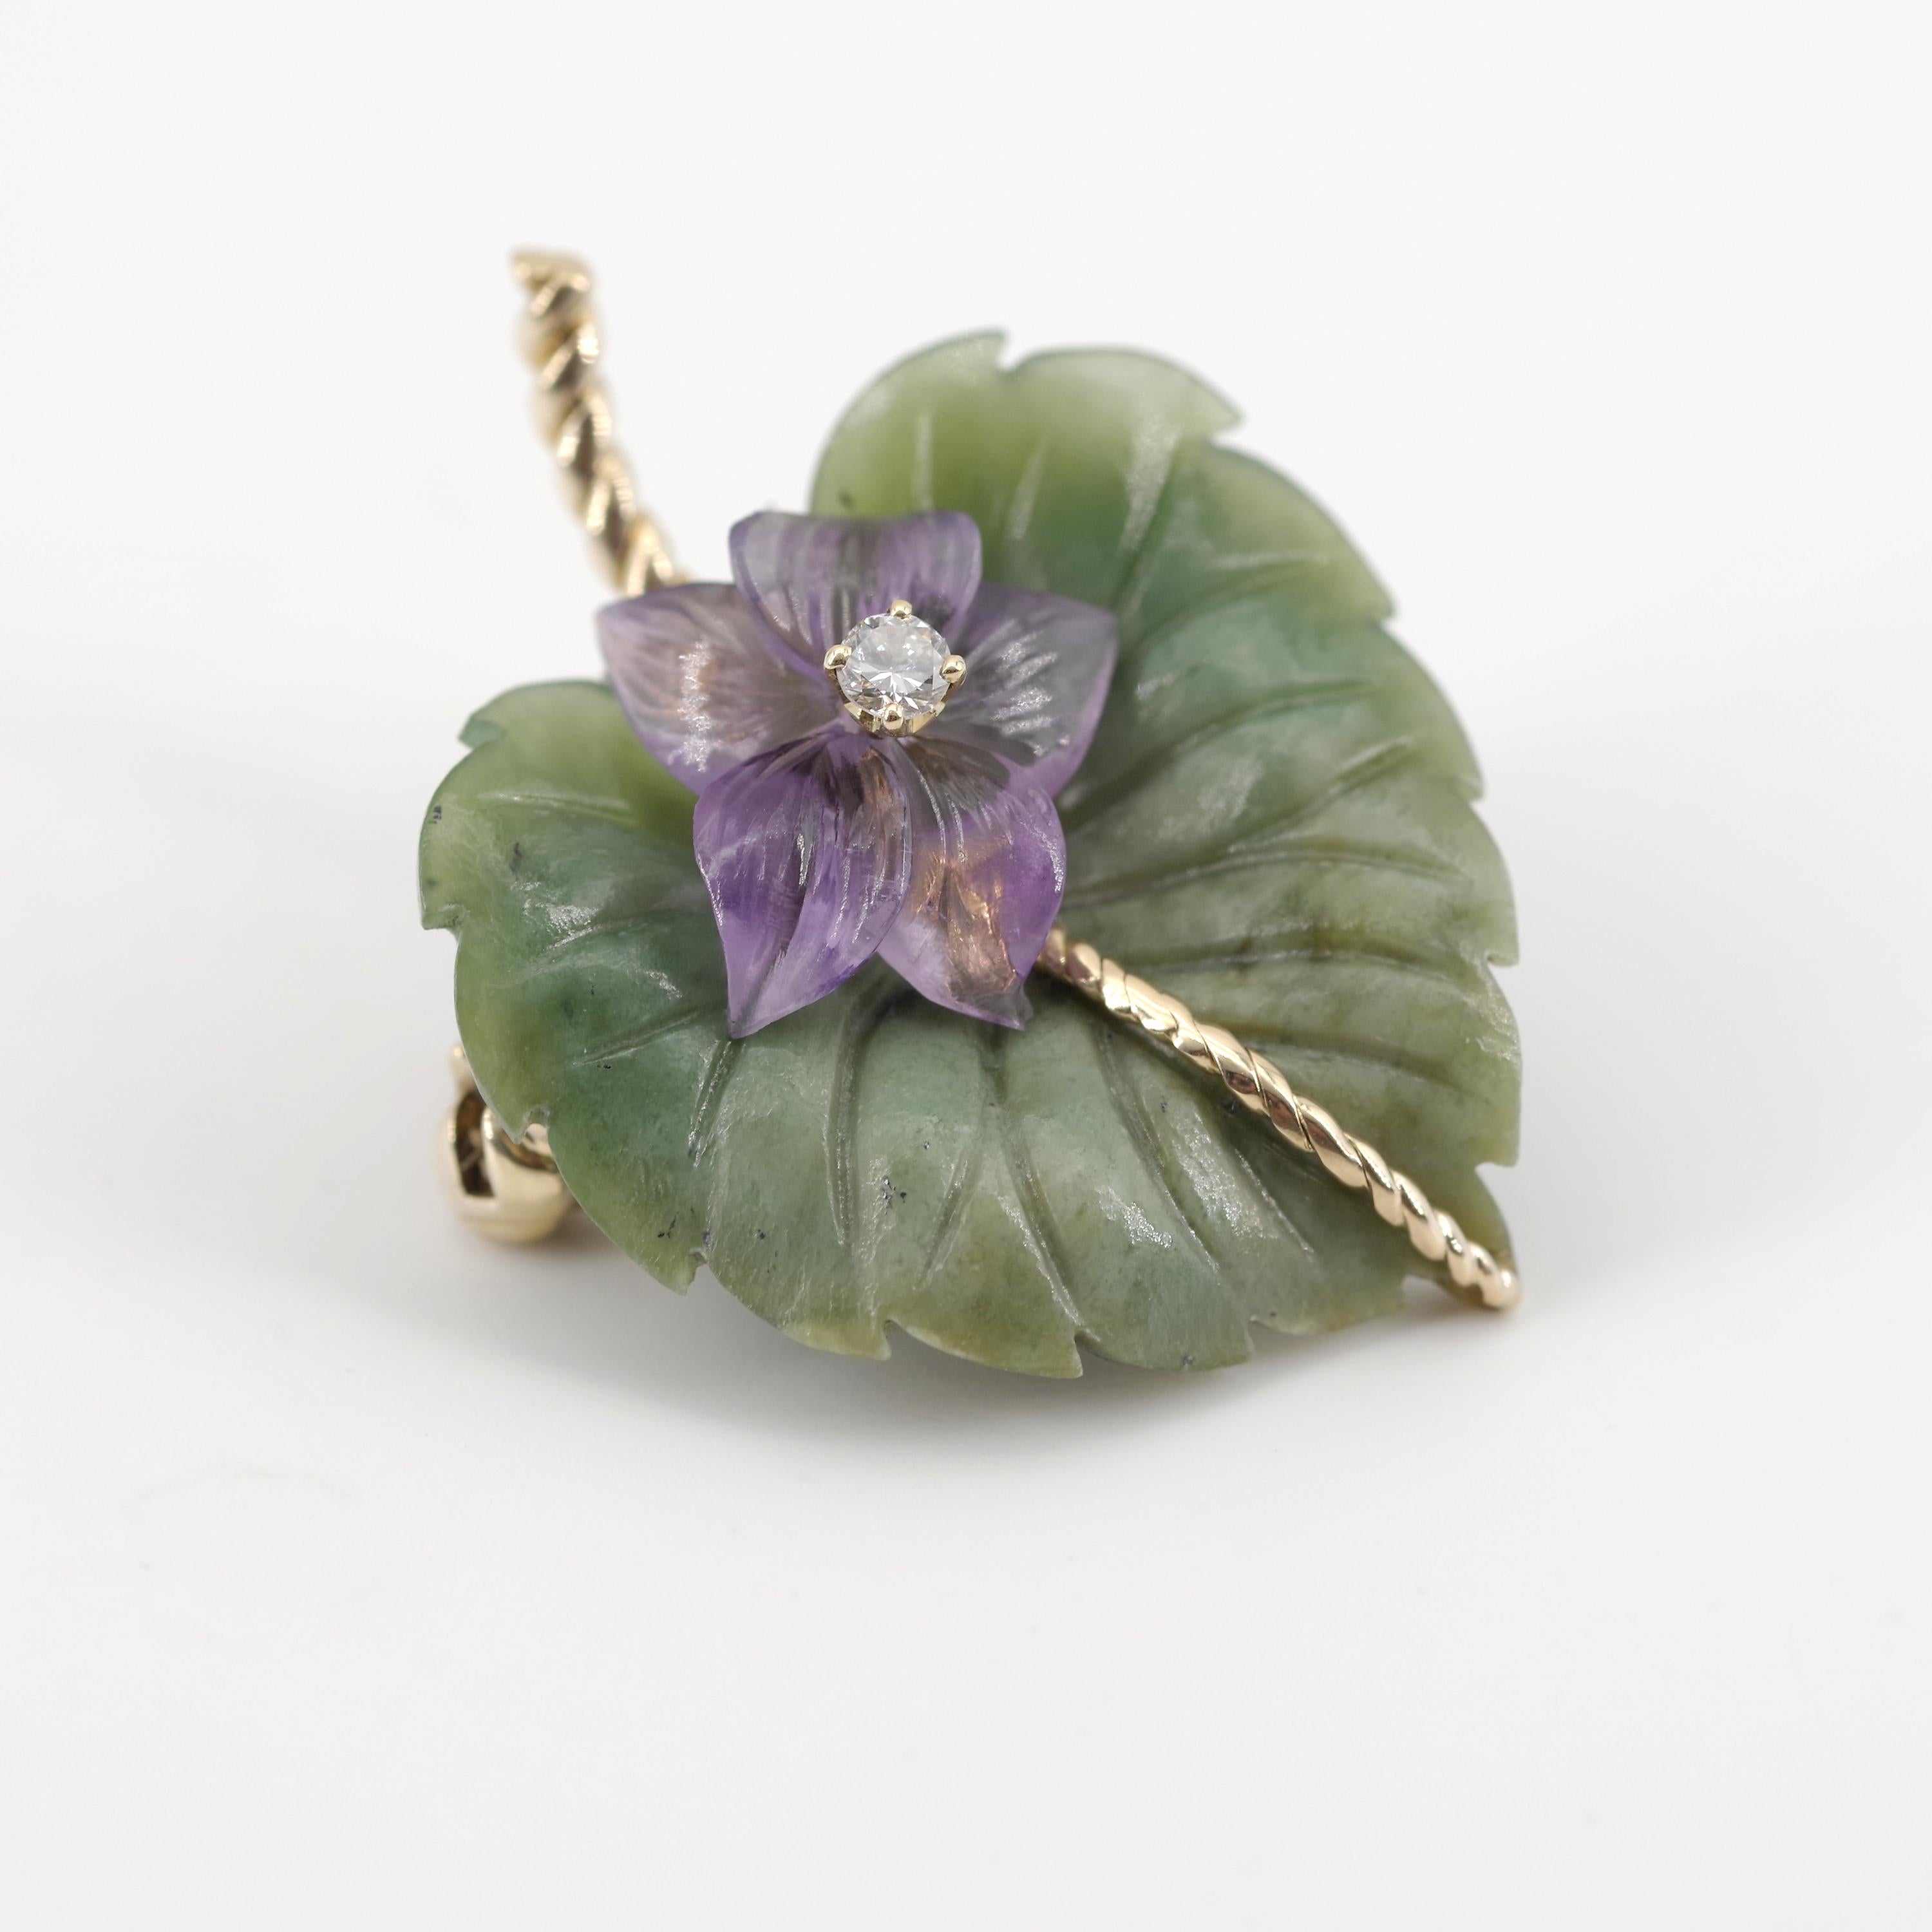 This mid-century Tiffany & Co. brooch was created in Austria circa 1955 from very fine quality nephrite jade, hand-carved into a delicate and realistic leaf. The central stem of the leaf is 18k yellow gold twisted wire. A hand-carved amethyst flower